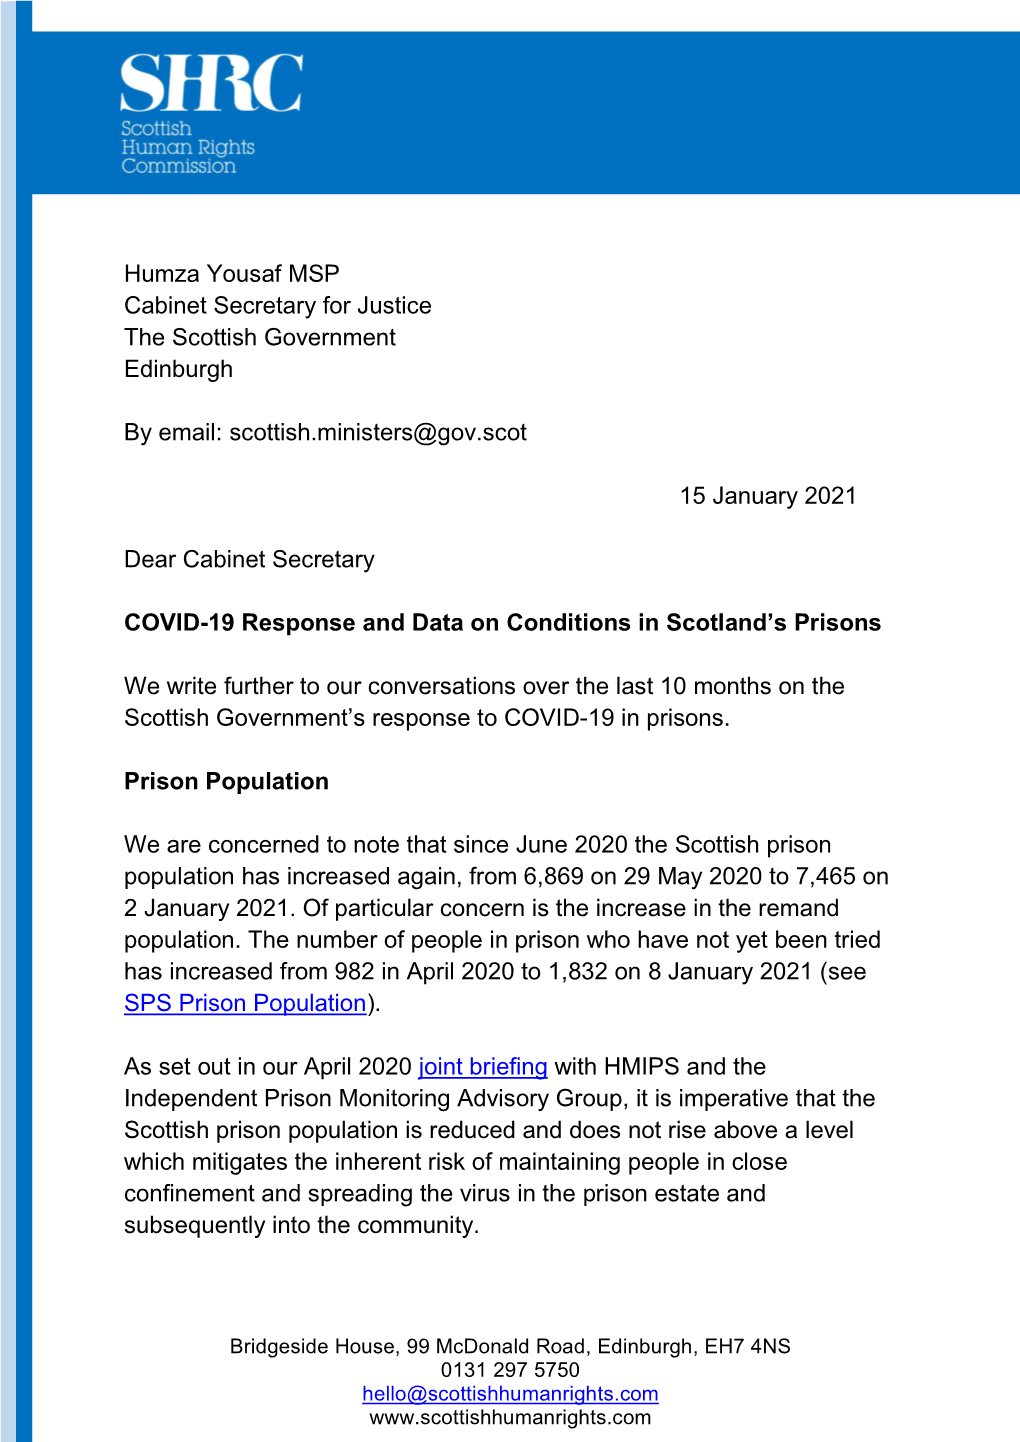 Humza Yousaf MSP Cabinet Secretary for Justice the Scottish Government Edinburgh by Email